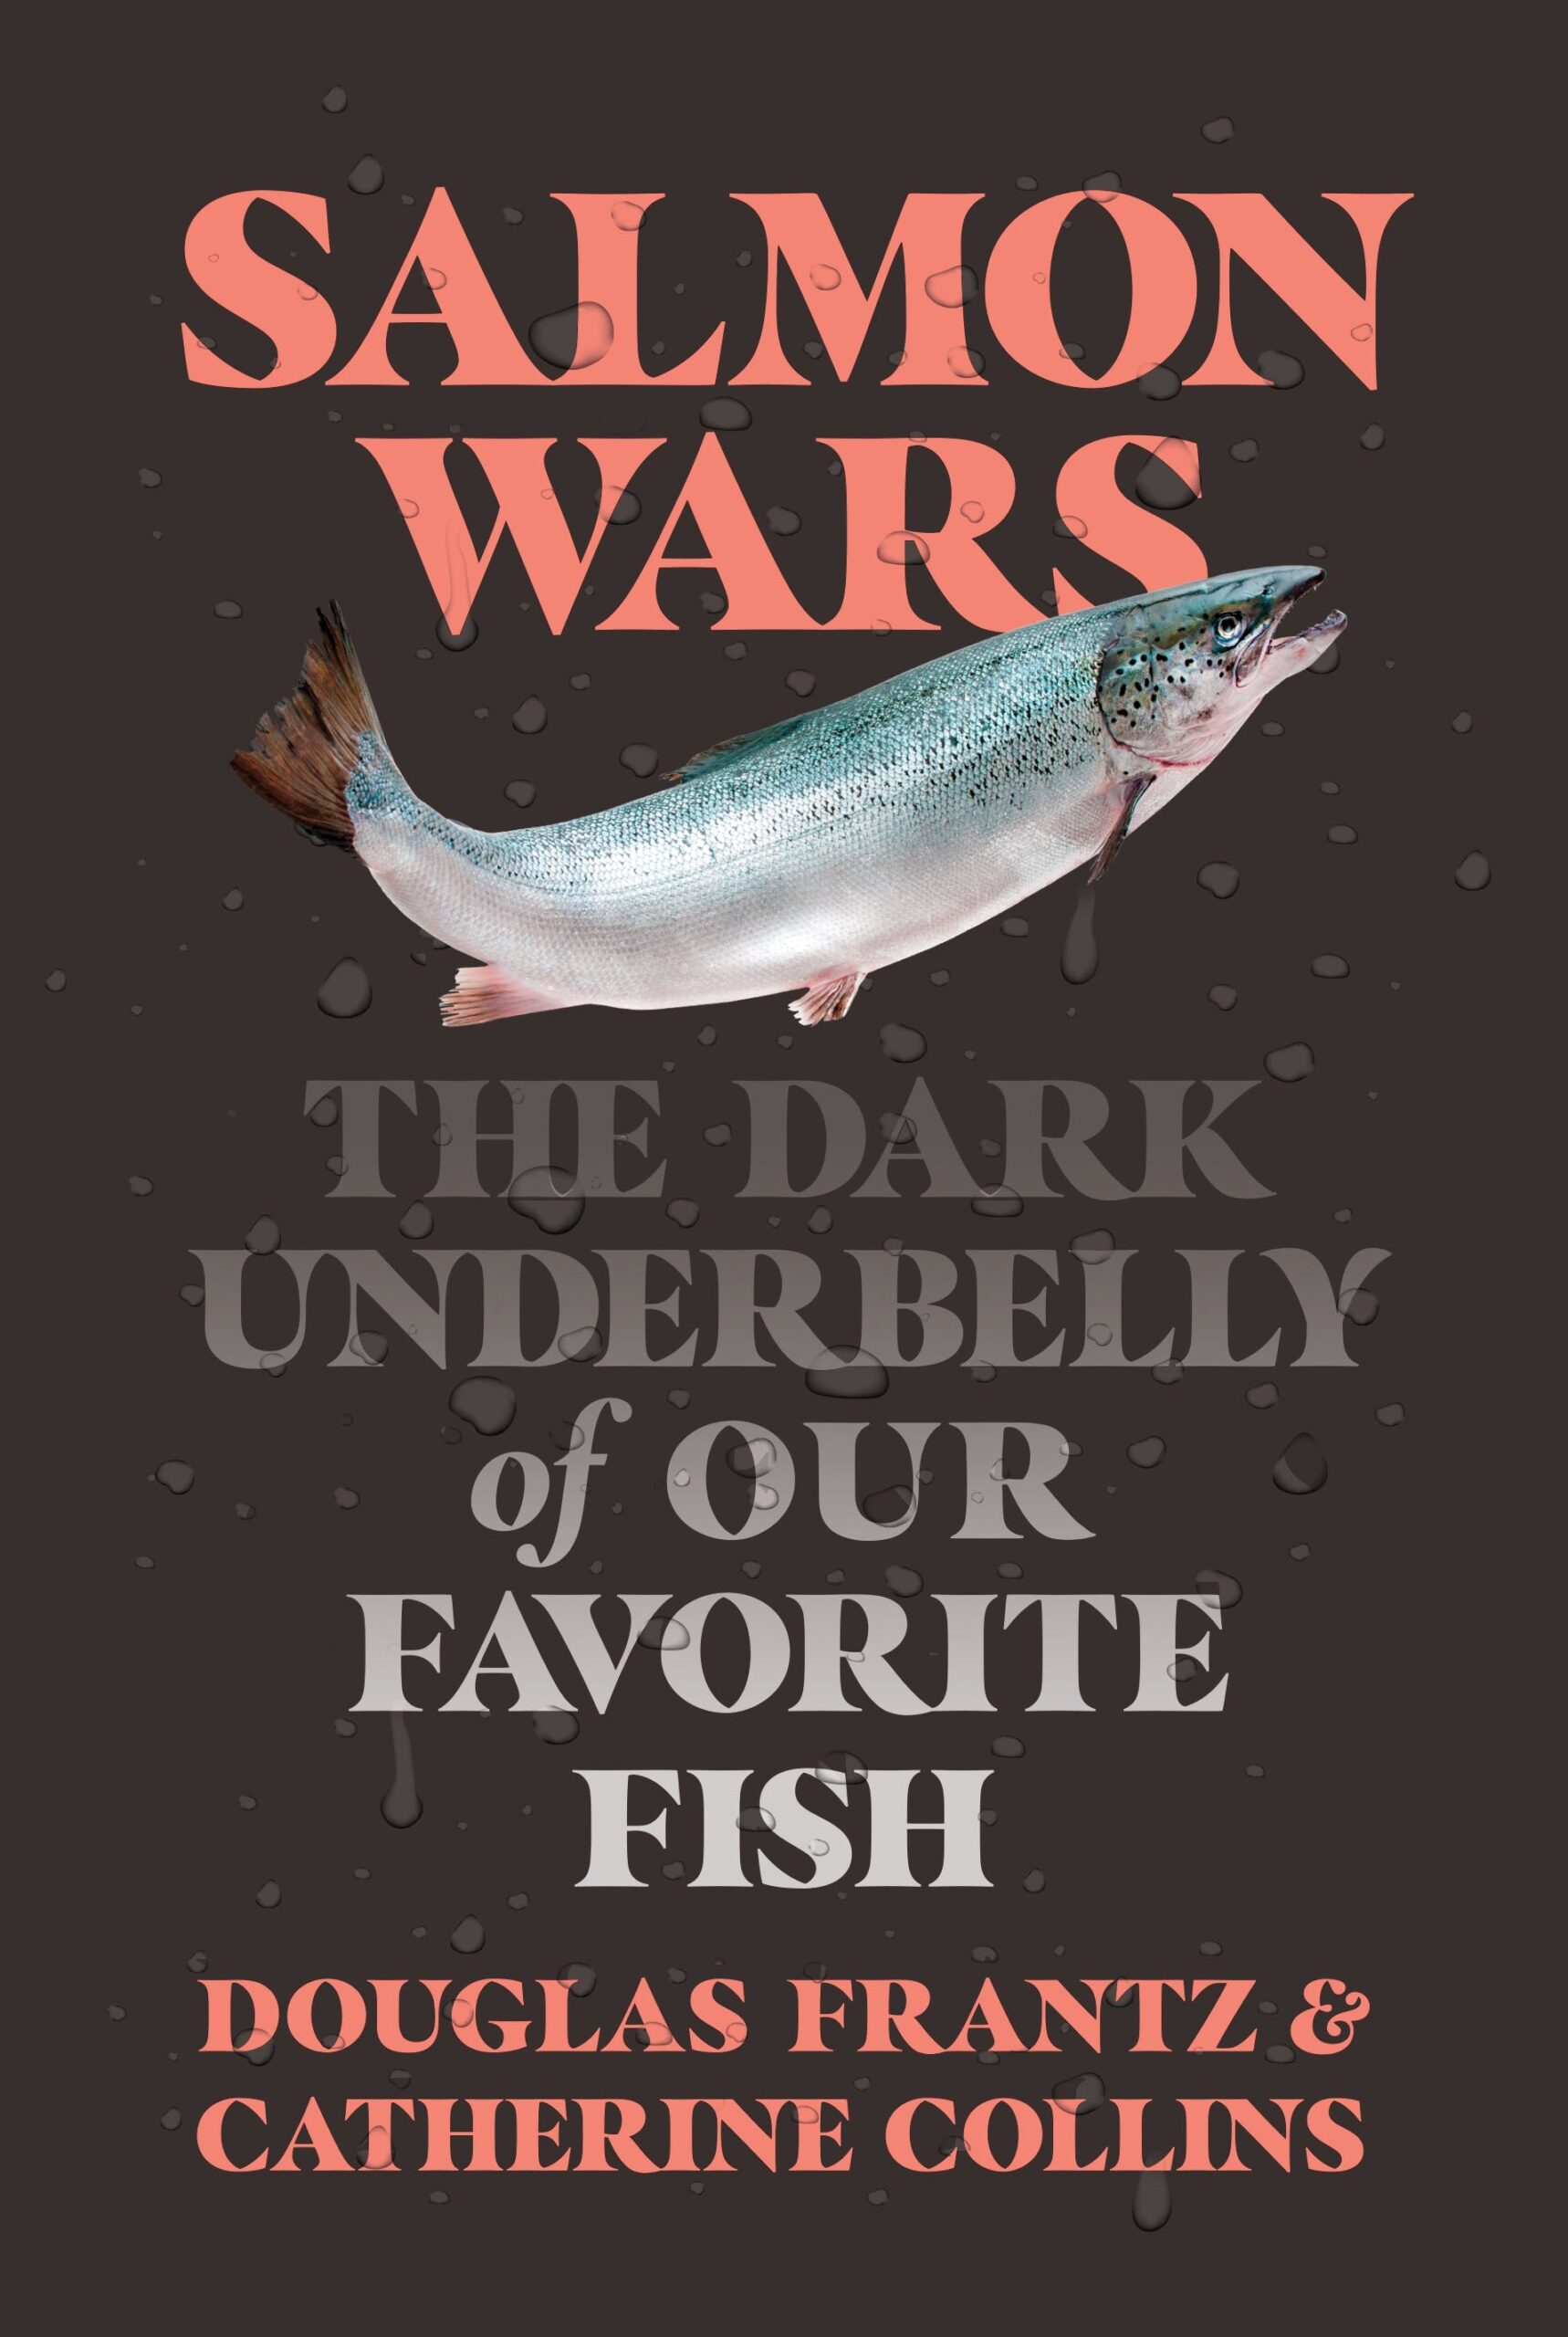 Salmon Wars by Catherine Collins & Douglas Frantz book cover